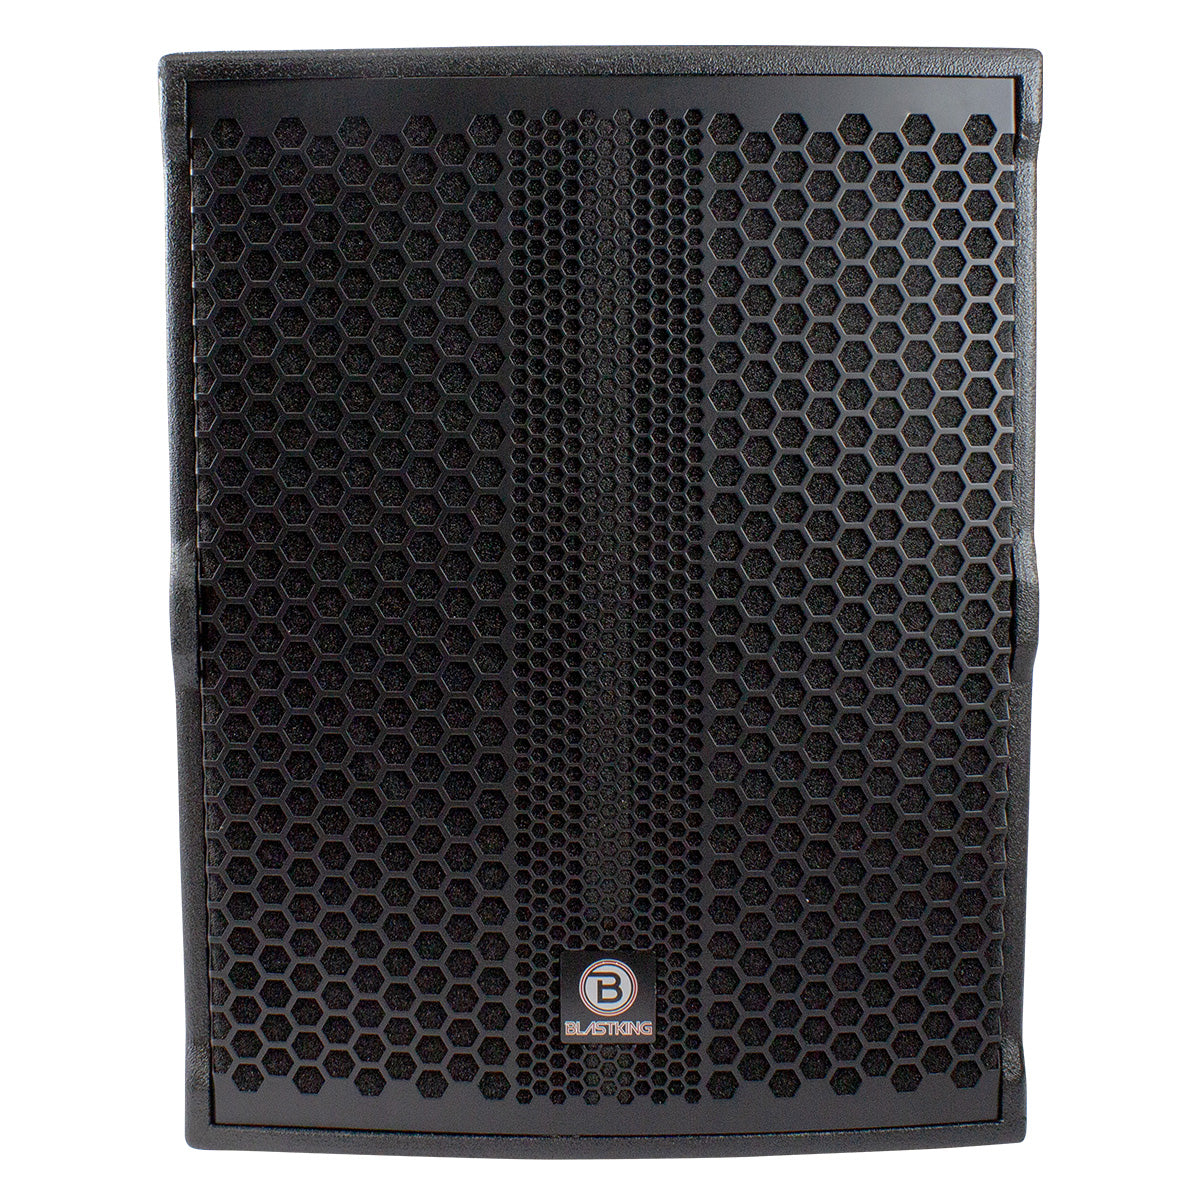 Blastking NOVO-18A 18” Active Subwoofer 1500 Watts Class-D with DSP Processor